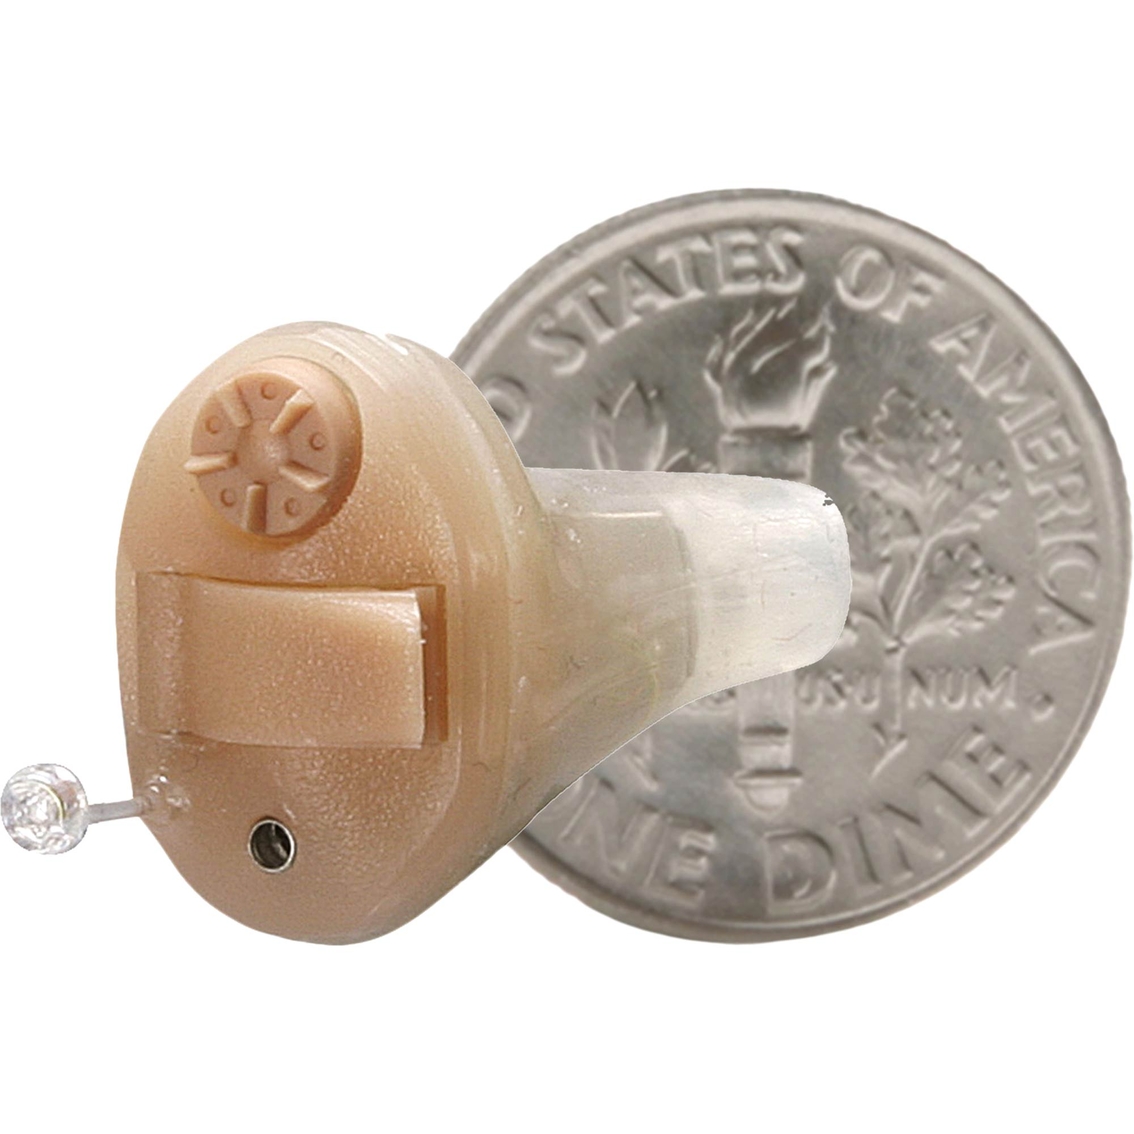 General Hearing Instruments SimplySoft Classic Left Ear Hearing Aid - Image 2 of 4